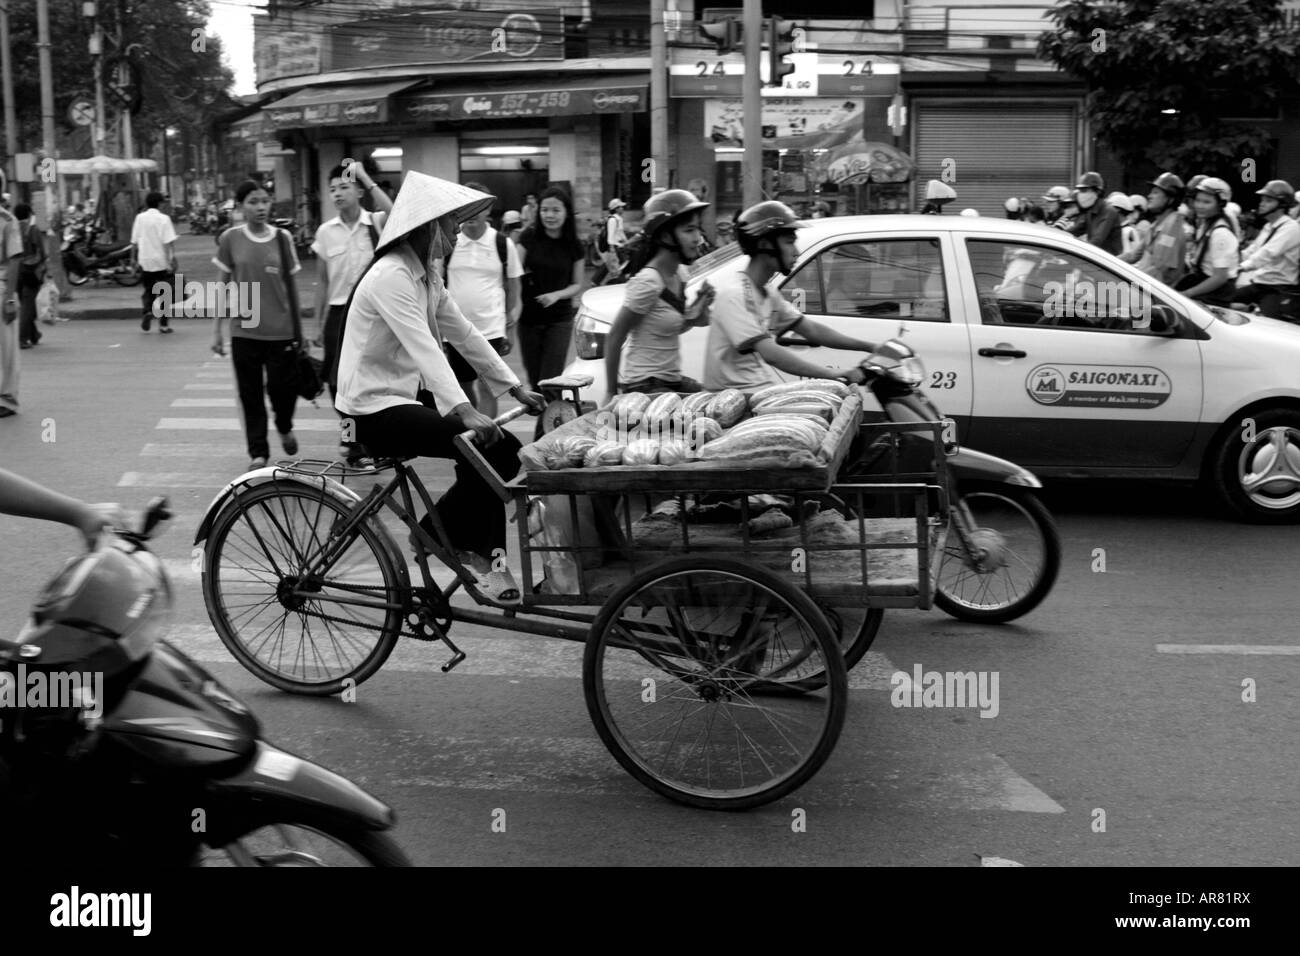 Hustle and Bustle on streets of Saigon, Vietnam in Black and White Stock Photo